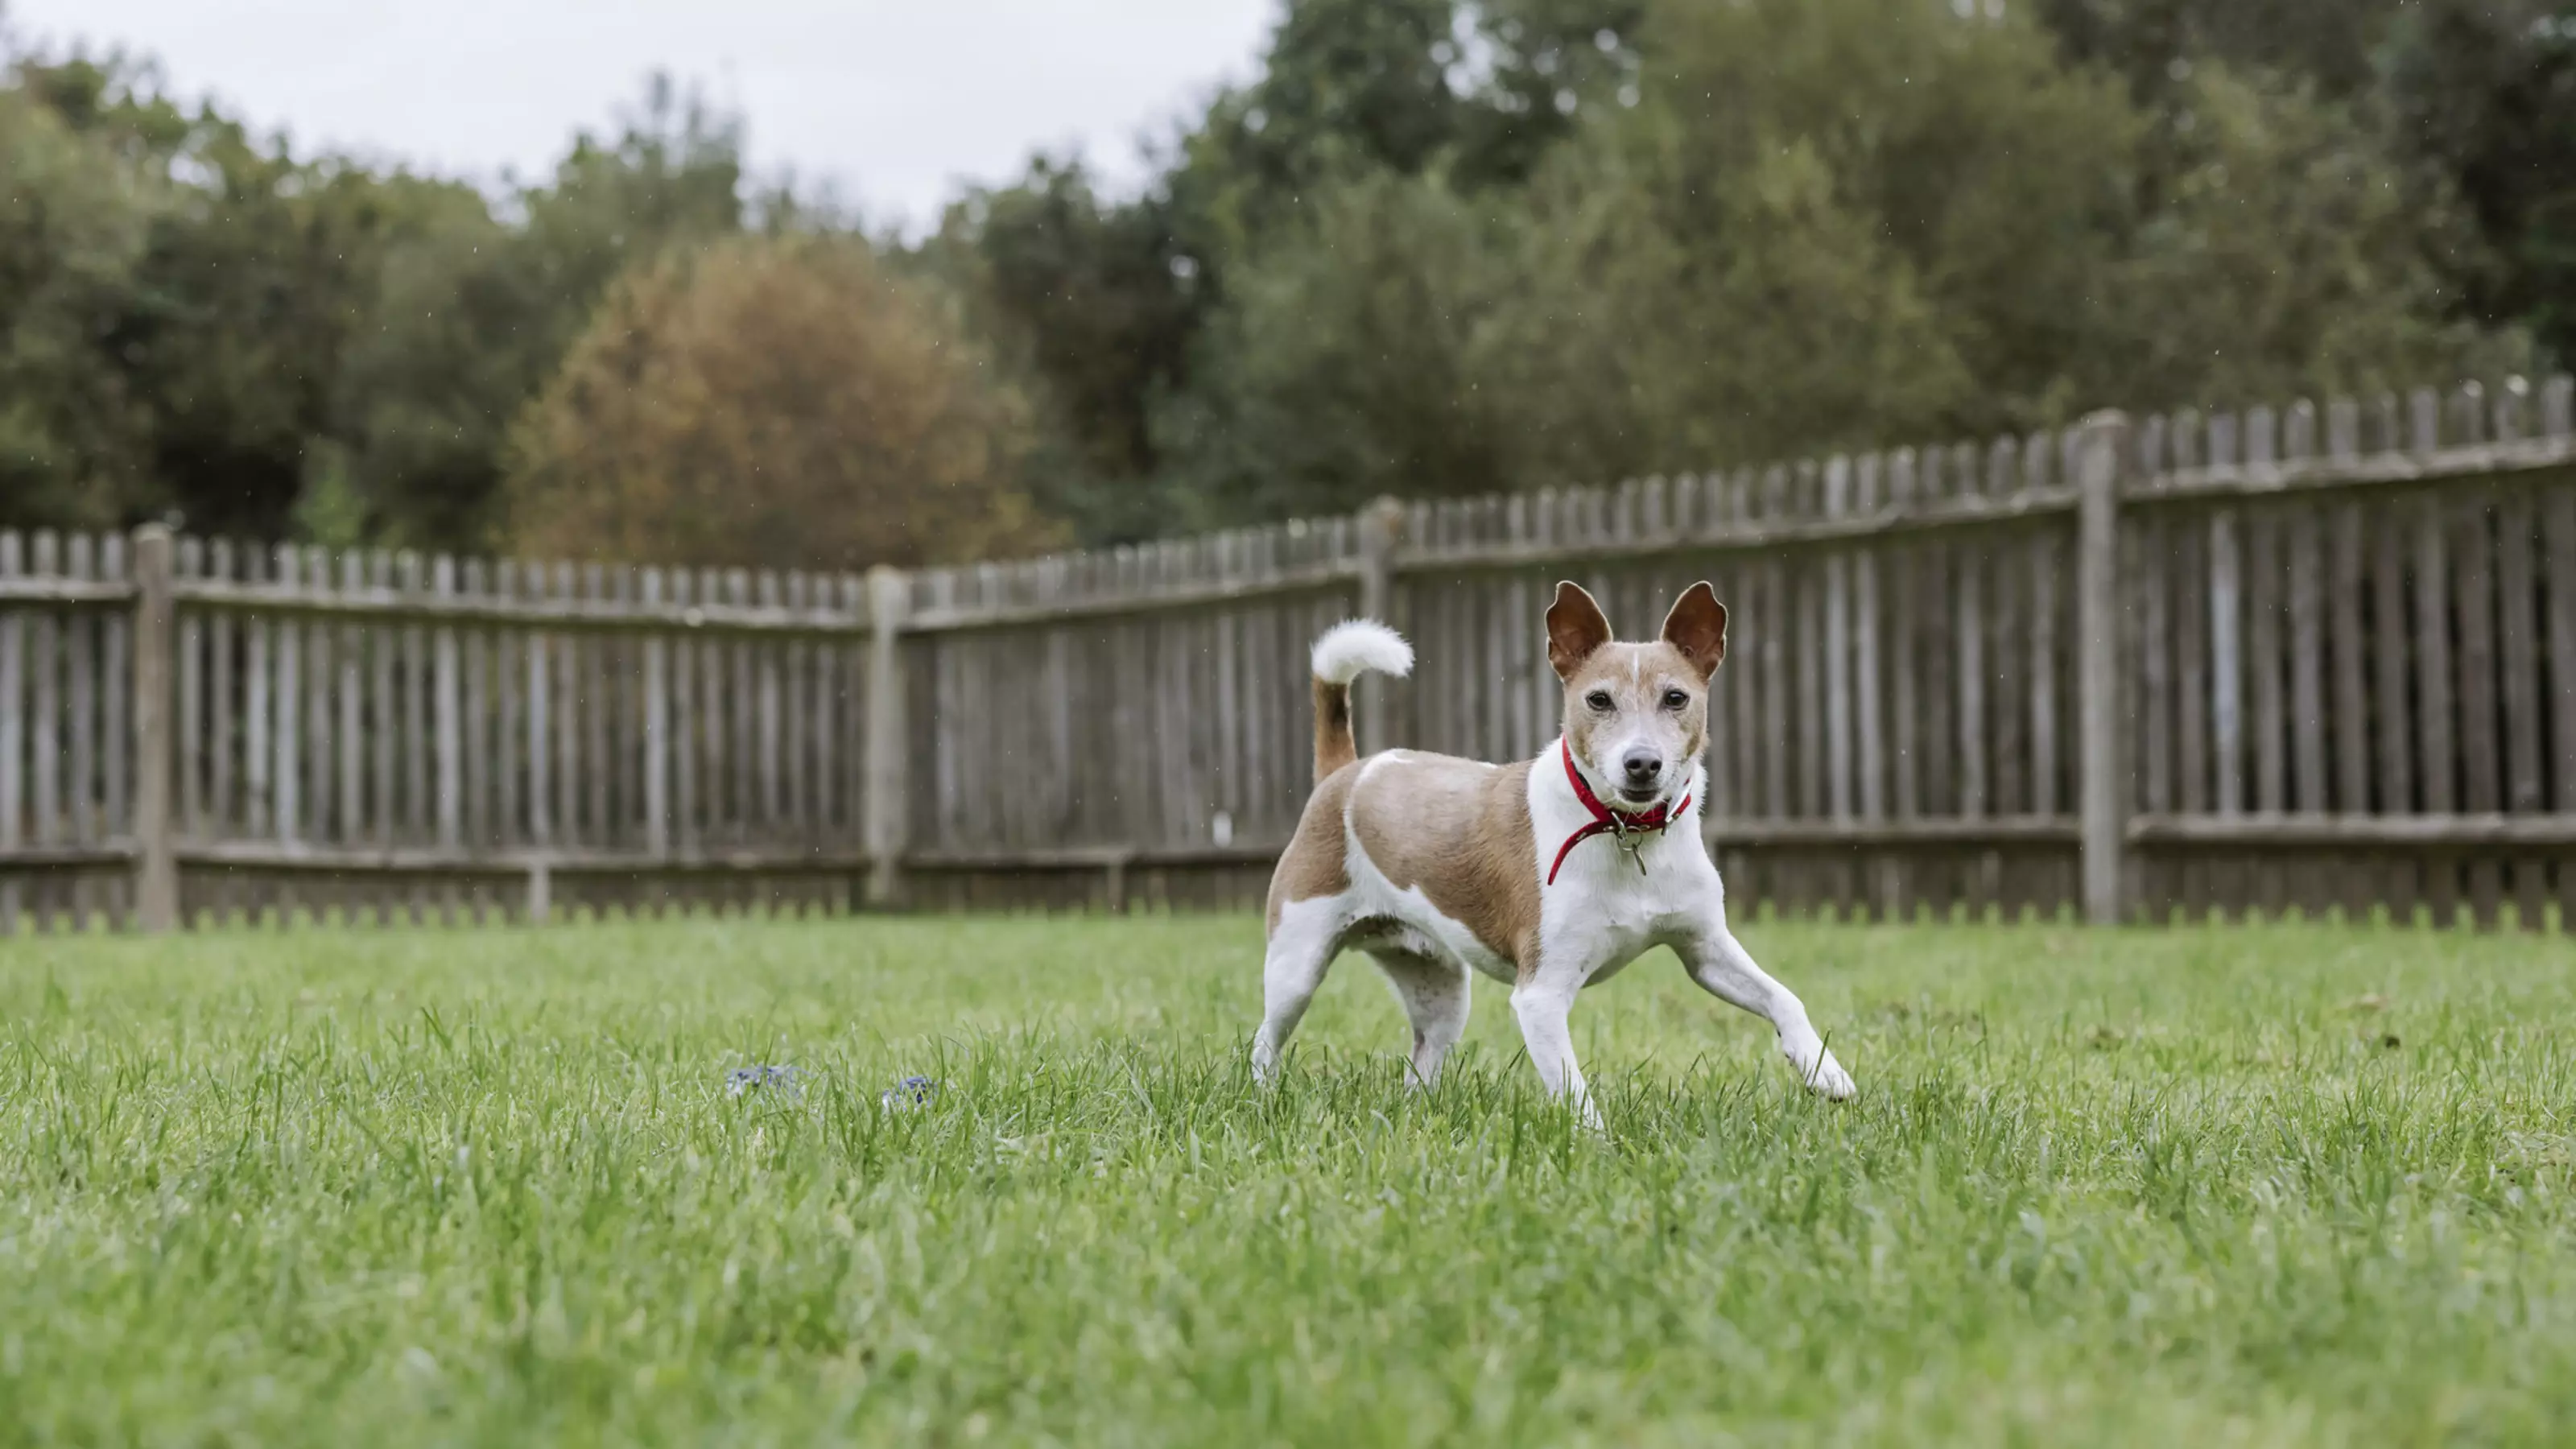 Jack russell terrier Hero runs through a grassy paddock surrounded by a wooden fence